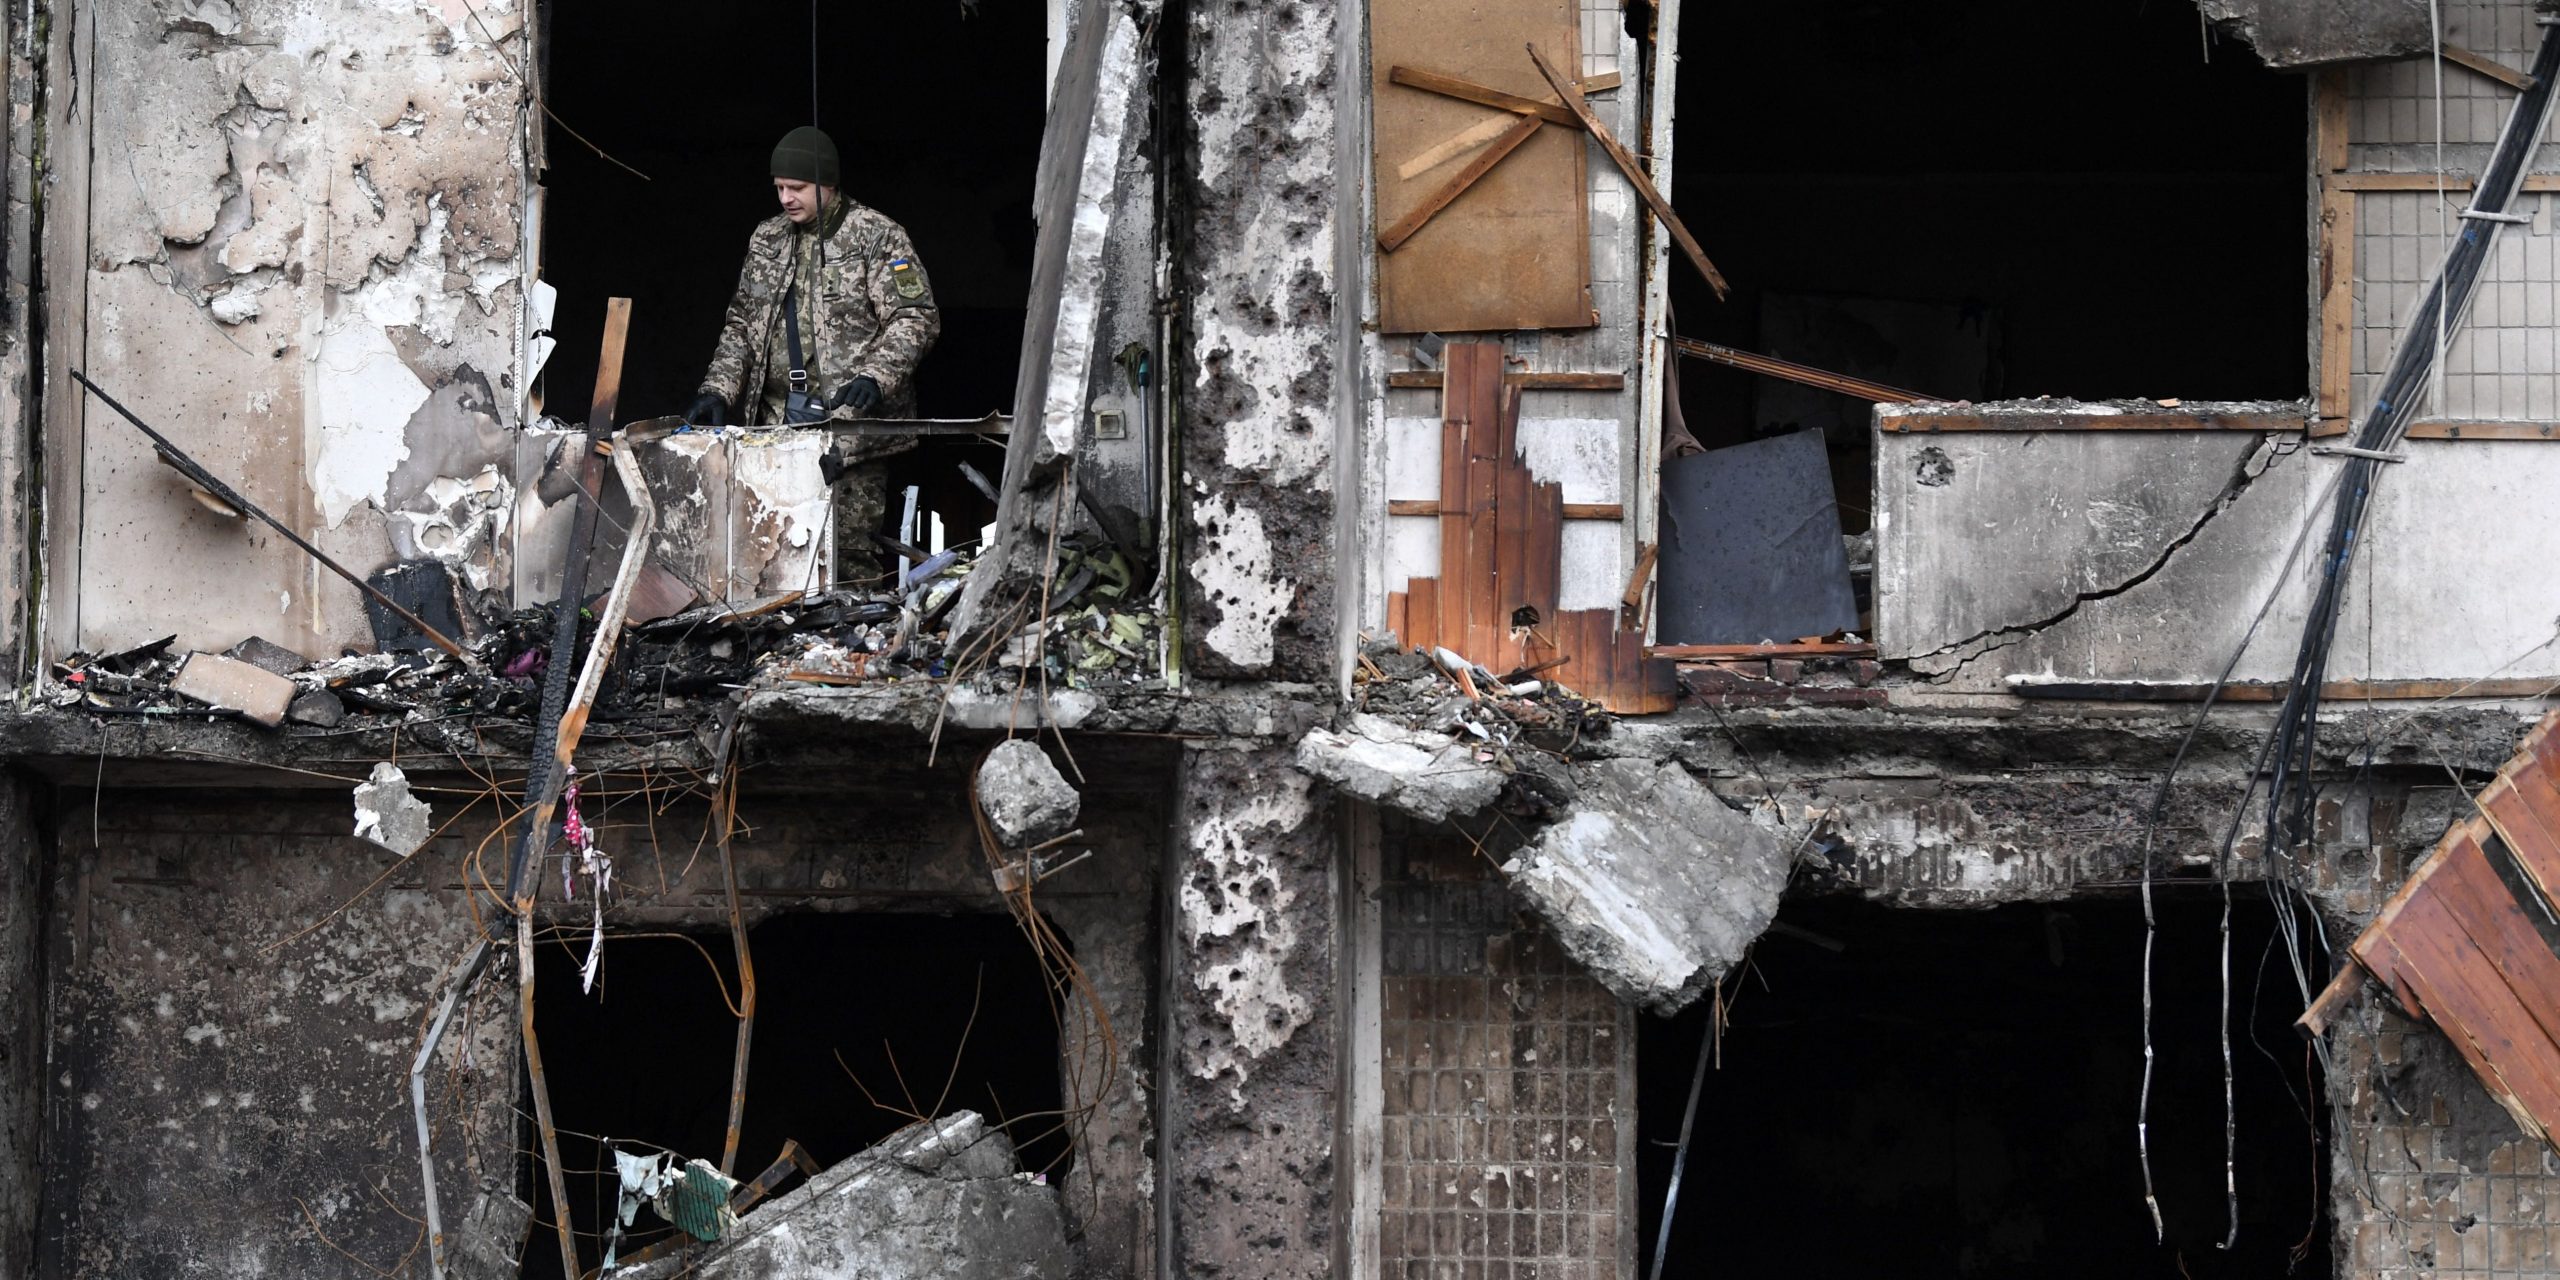 A Ukrainian serviceman is seen in the window of a damaged residential building at Koshytsa Street, a suburb of the Ukrainian capital Kyiv, where a military shell allegedly hit, on February 25, 2022